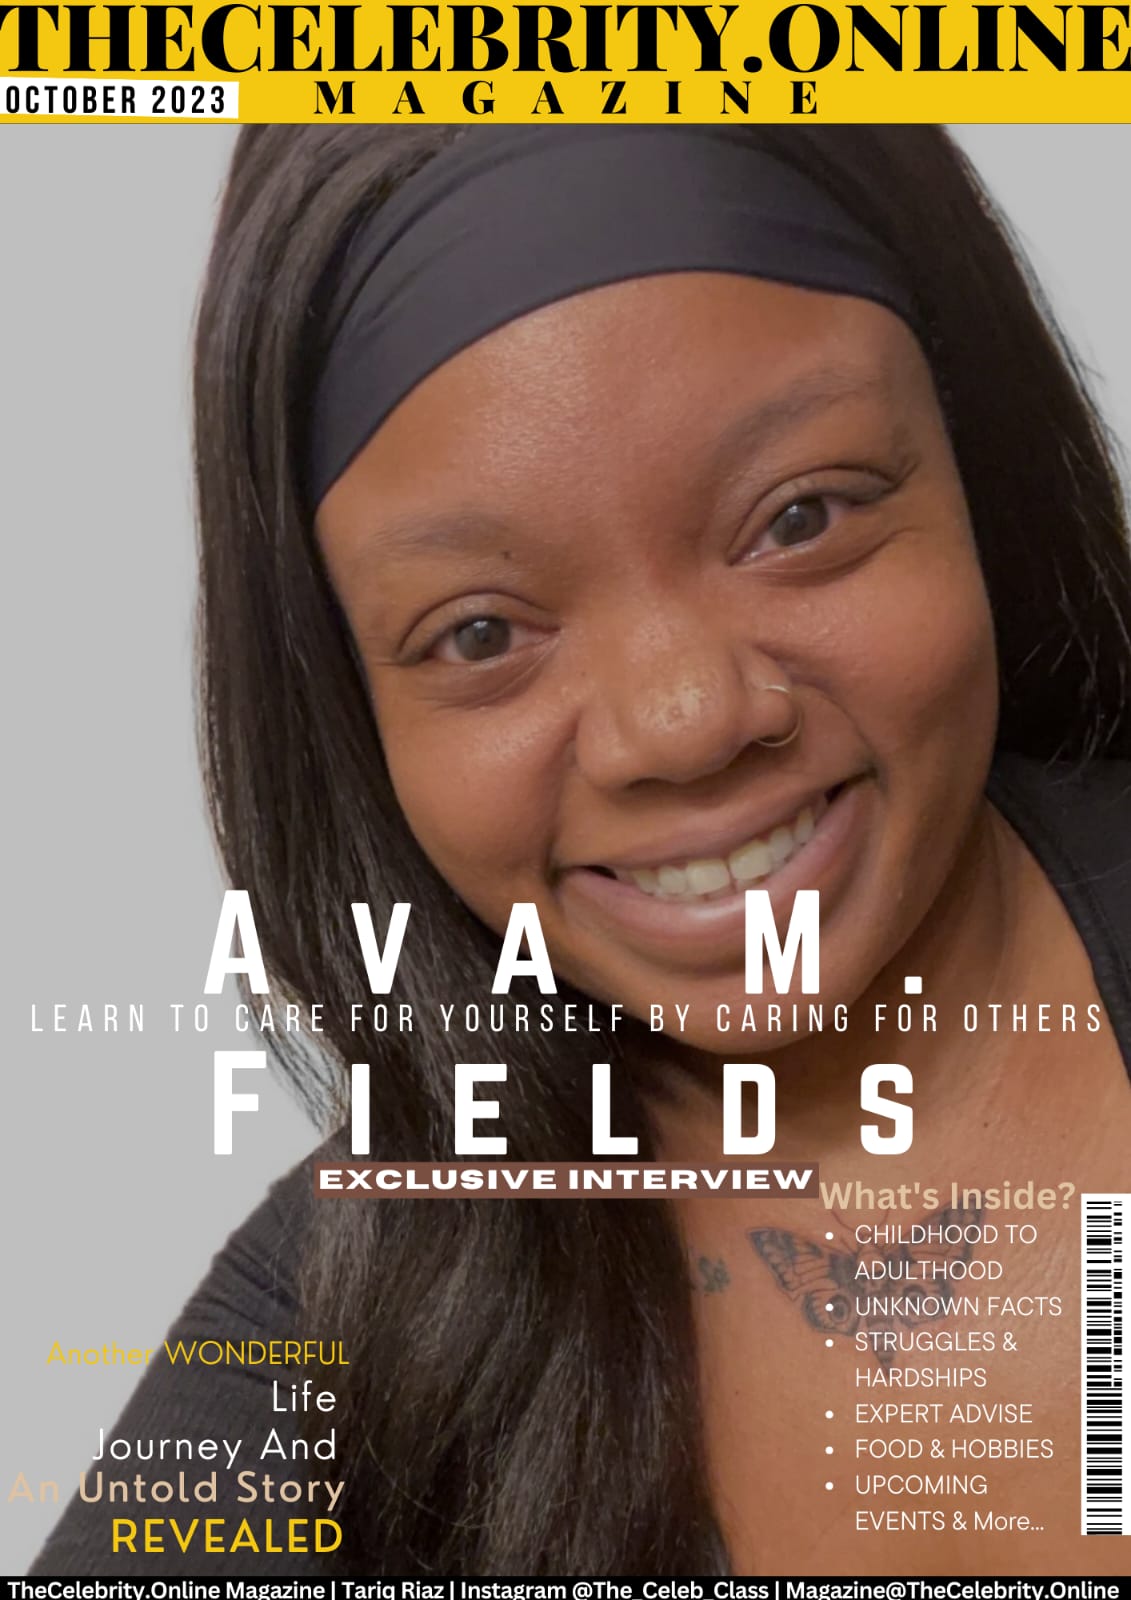 Ava M. Fields Exclusive Interview – ‘Learn to care for yourself by caring for others’